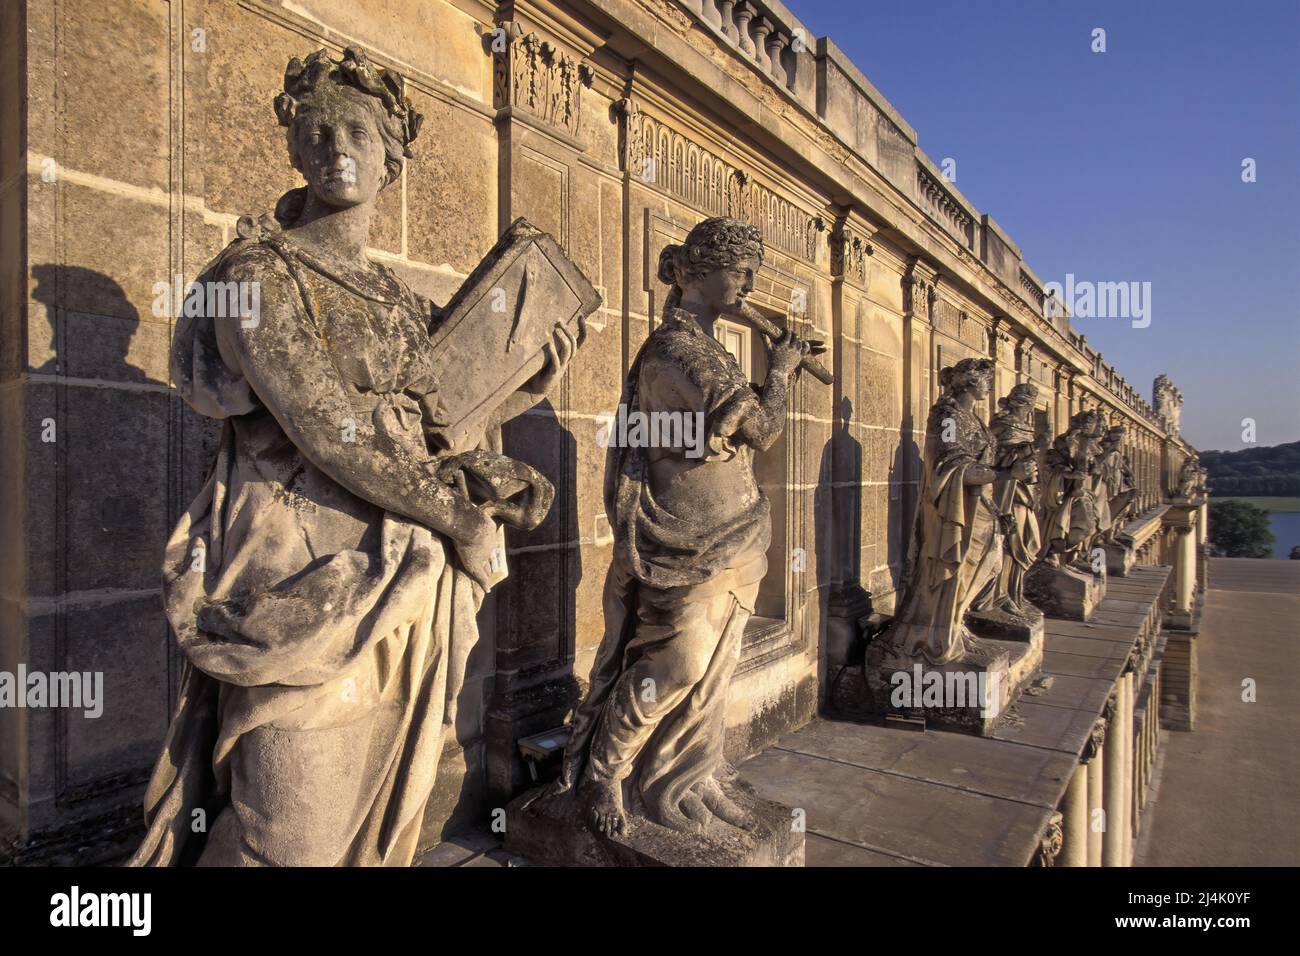 France. Yvelines (78) Palace of Versailles - Aile du Midi, west facade: aerial picture of a set of statues, goddesses, dedicated to the arts of music. Stock Photo